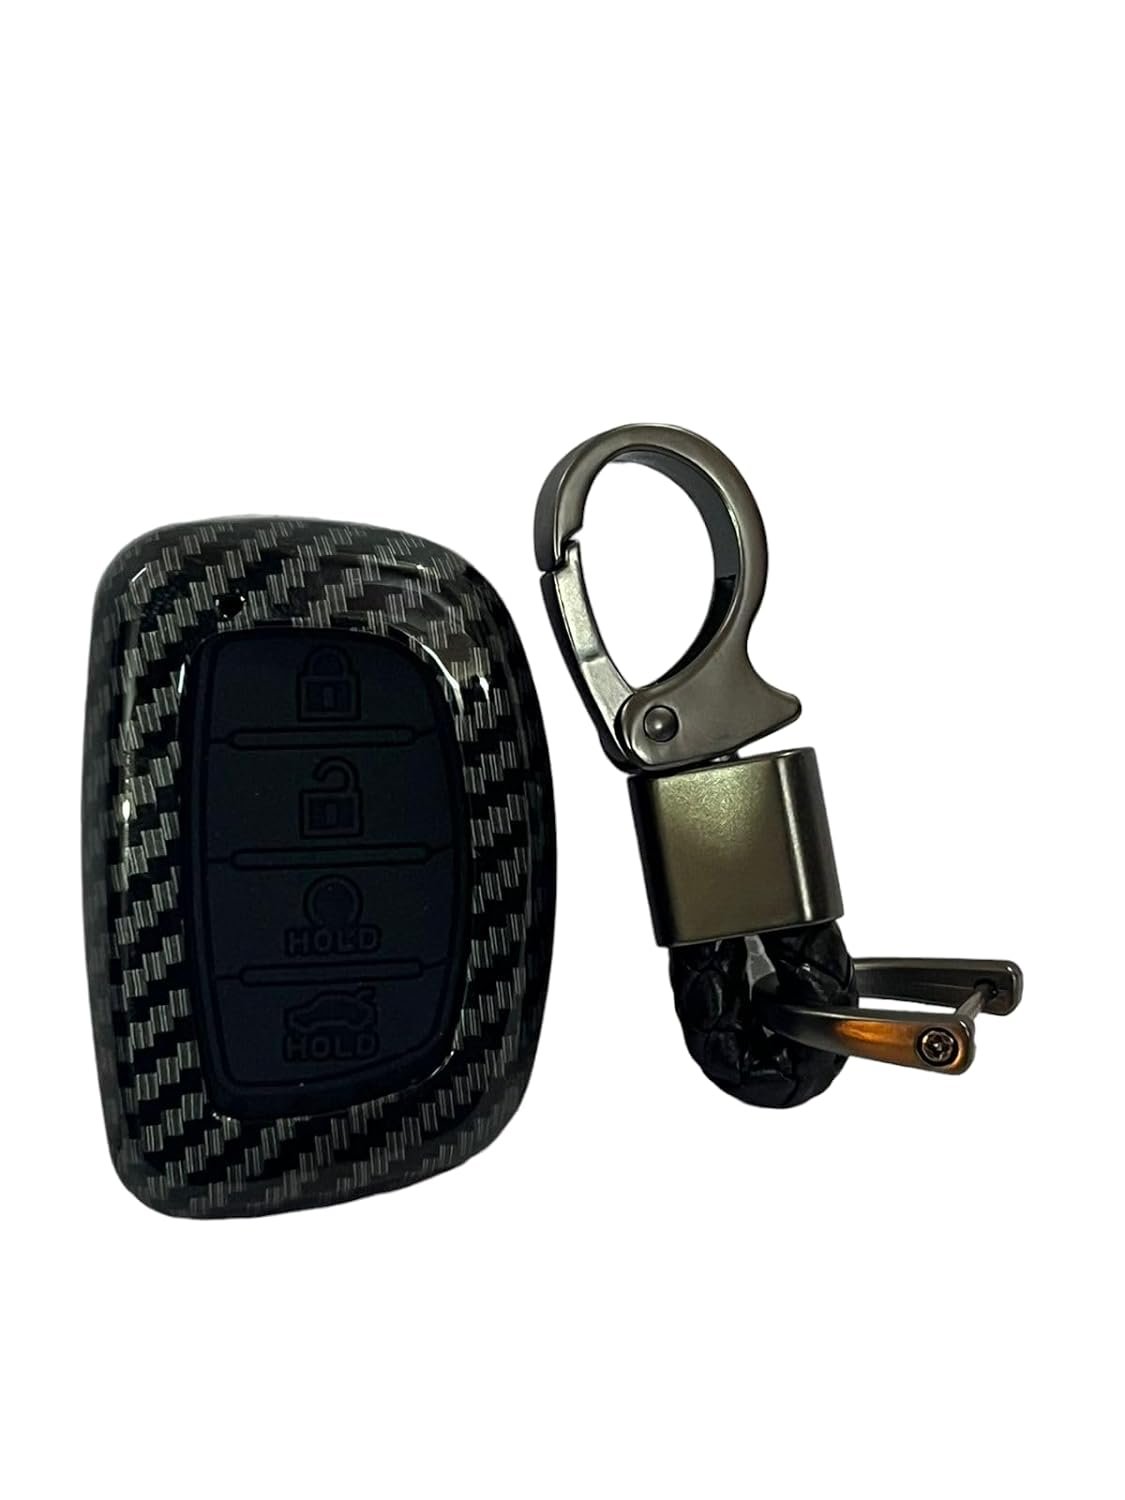 Carbon Fiber ABS Car Key Cover Compatible with Hyu-ndai Alcazar and Creta Car 4 Button Smart Key (Key Chain Included) Image 